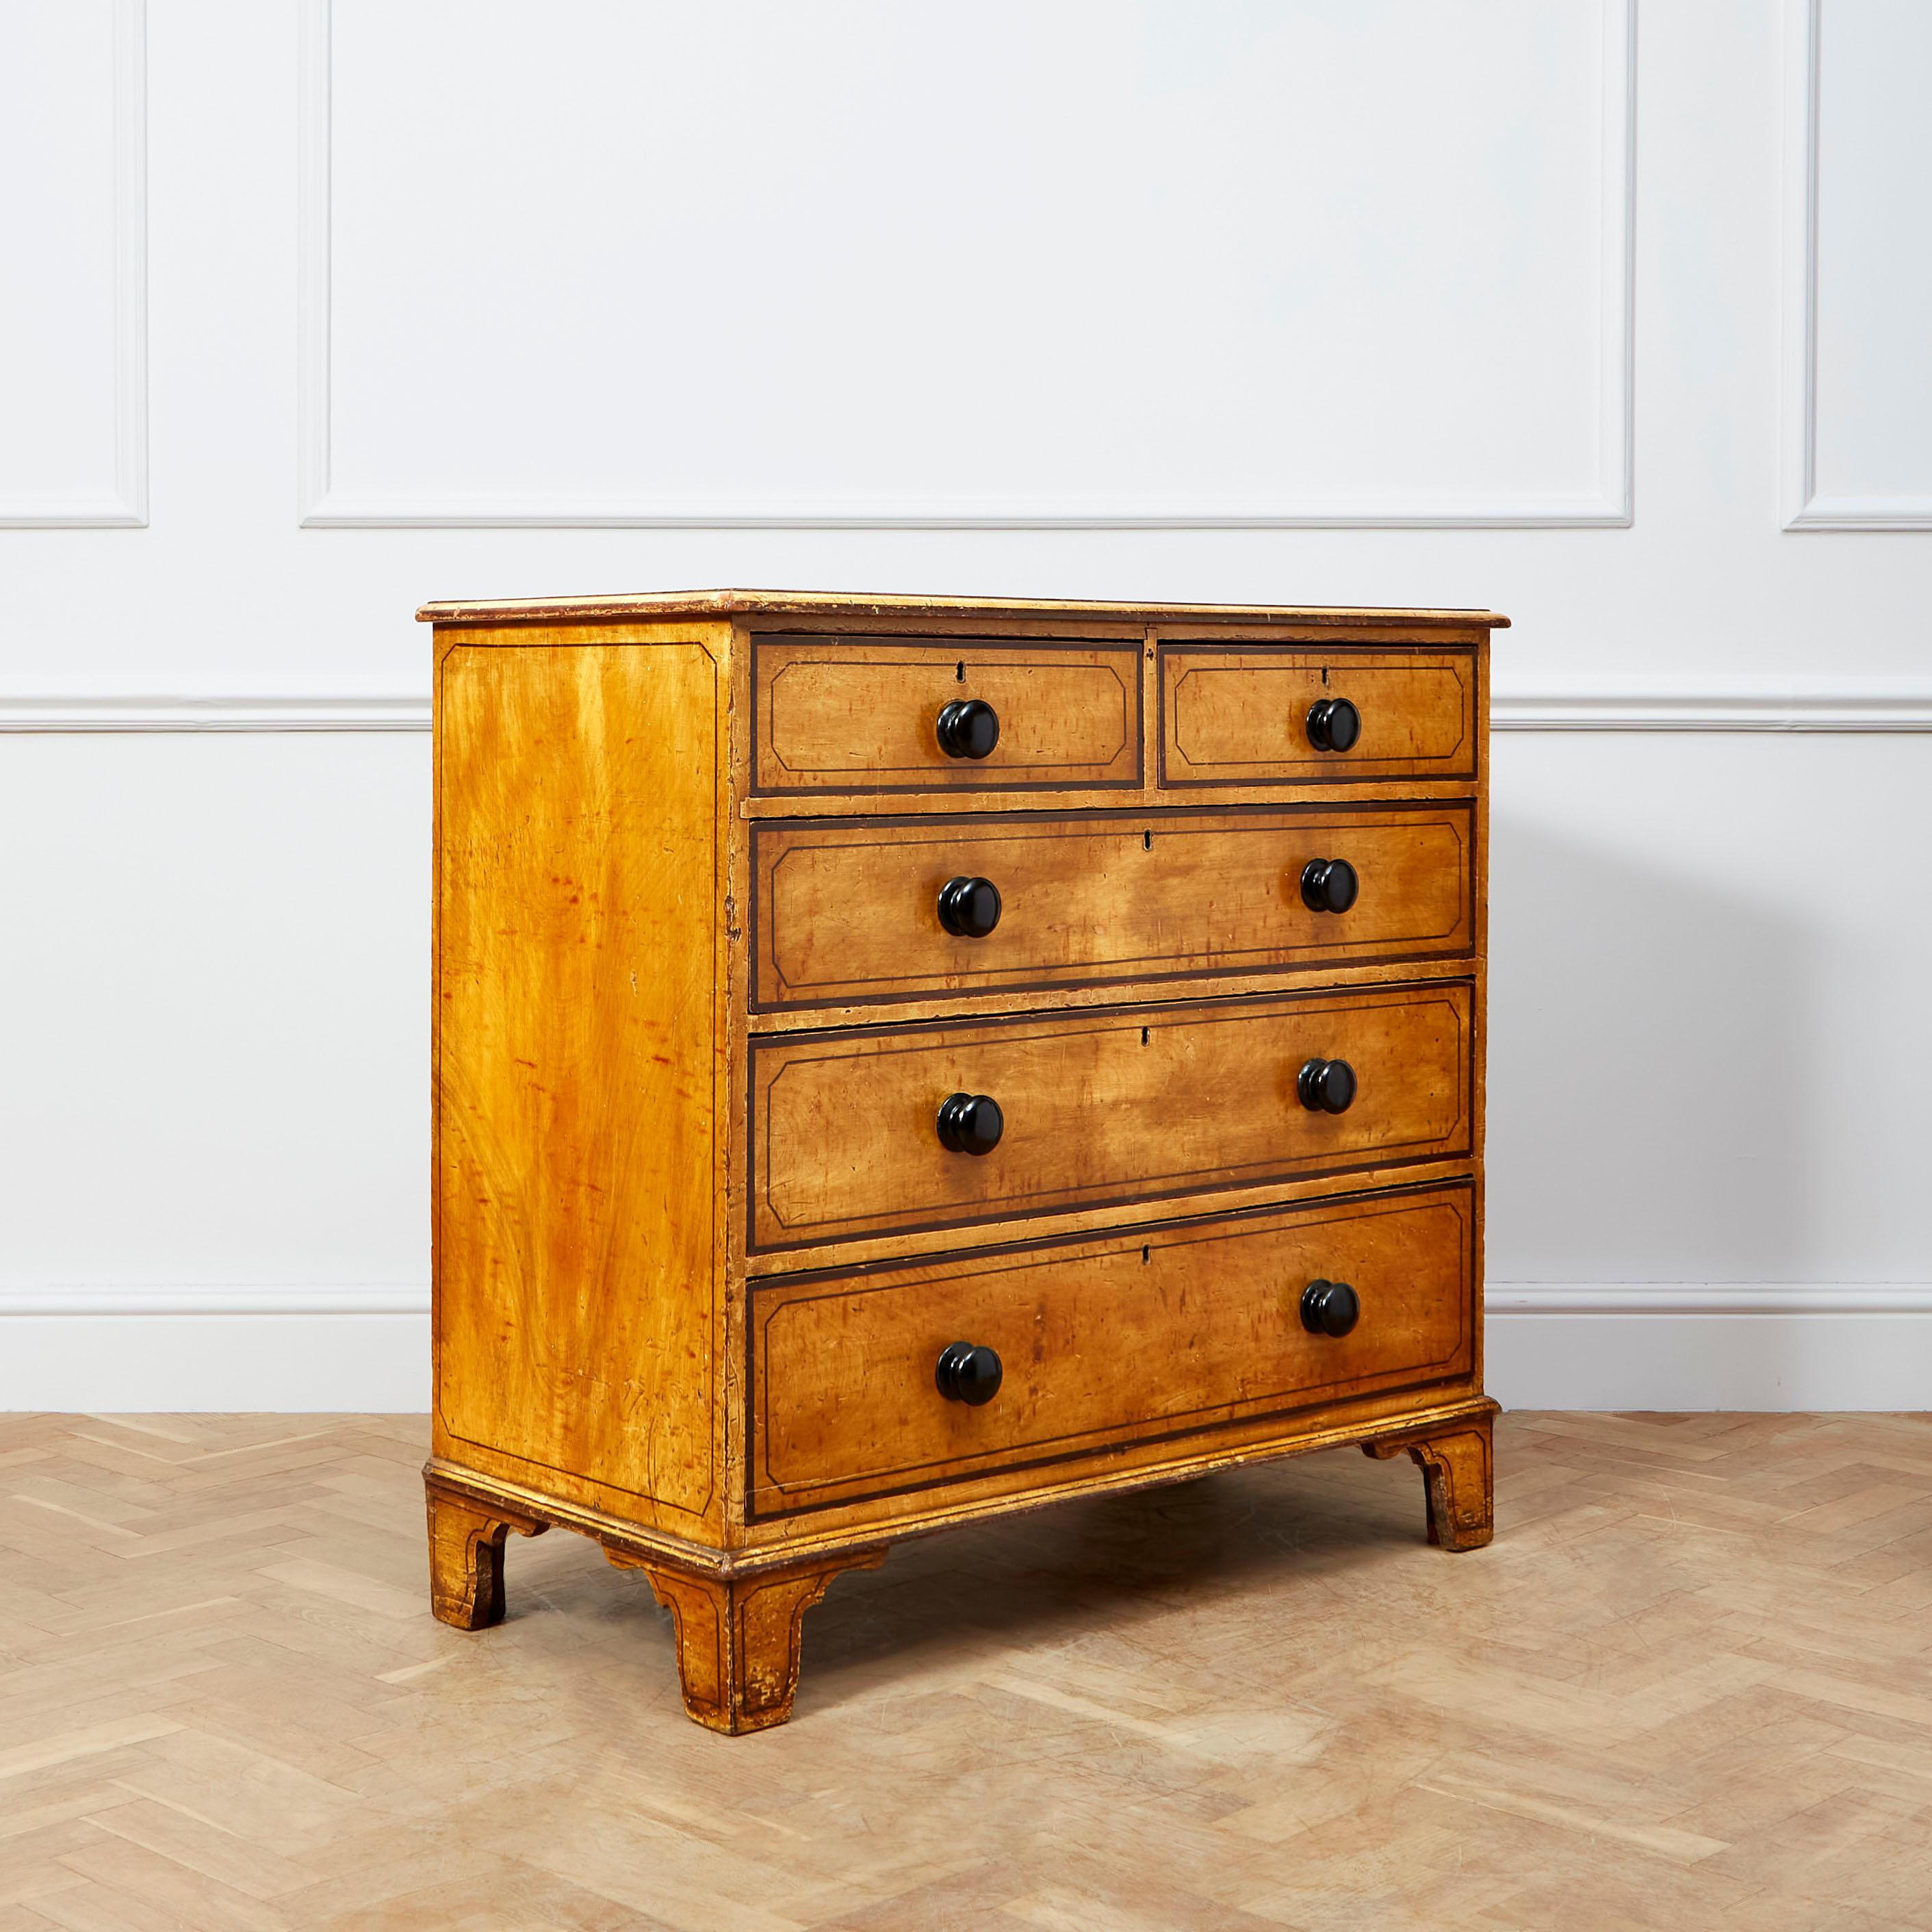 British 19th Century Painted Chest of Drawers For Sale